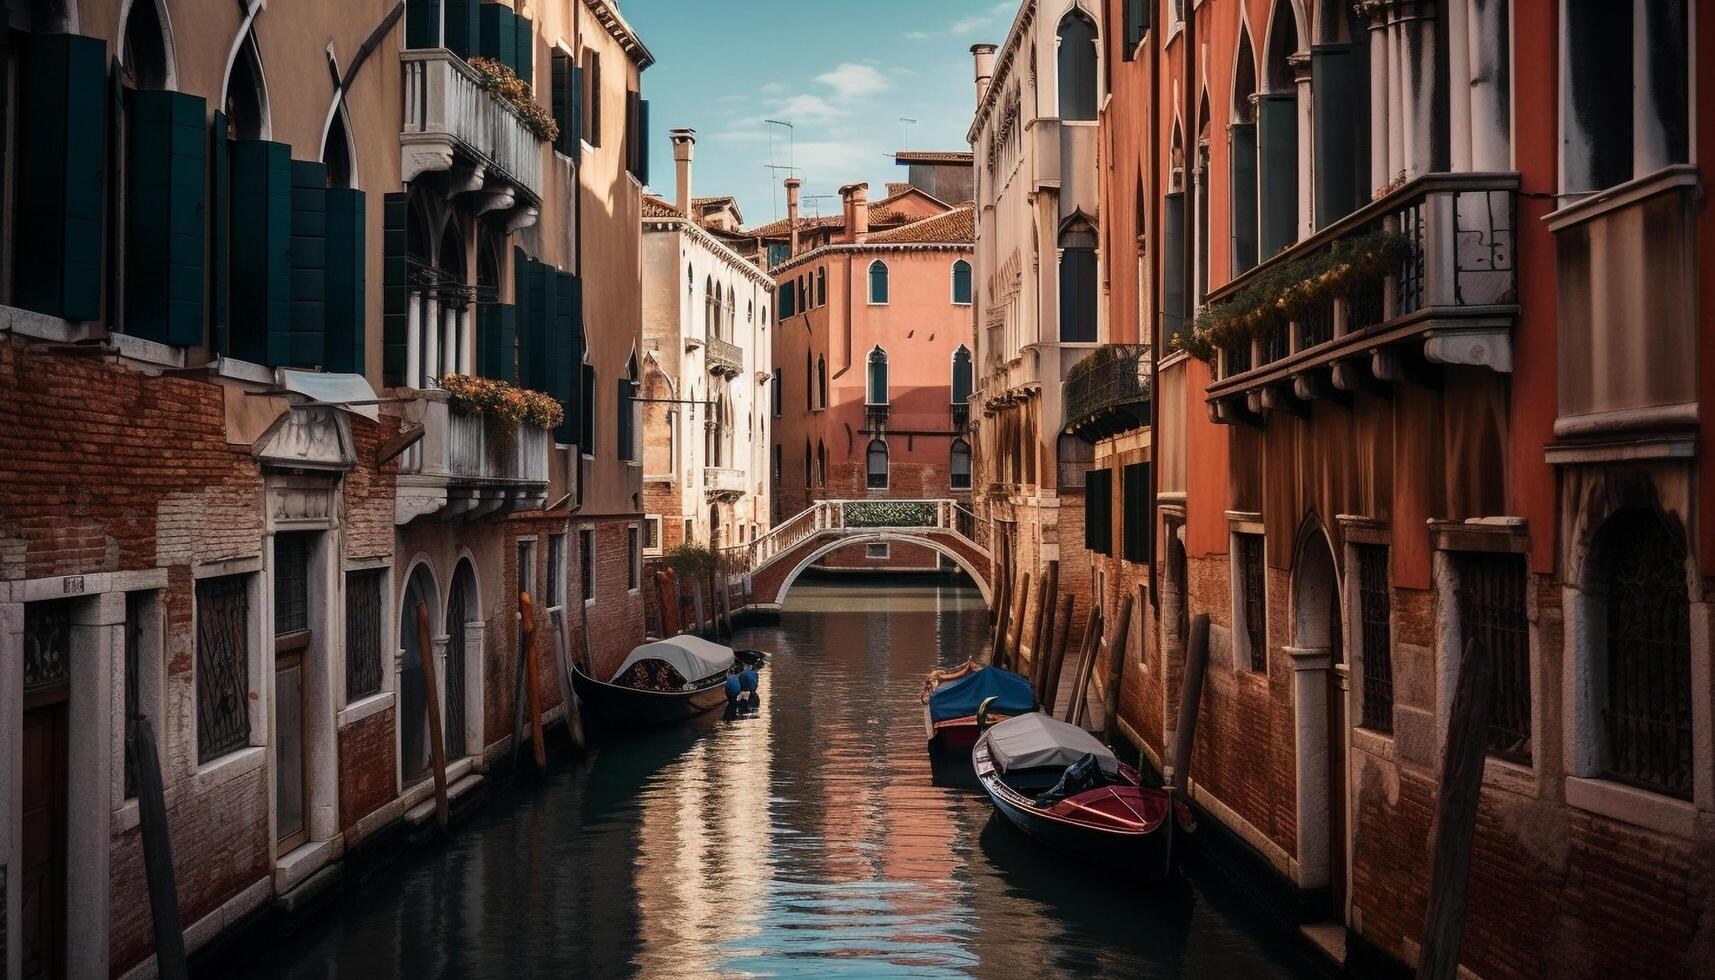 Gondola glides through Venetian canals at dusk generated by AI photo